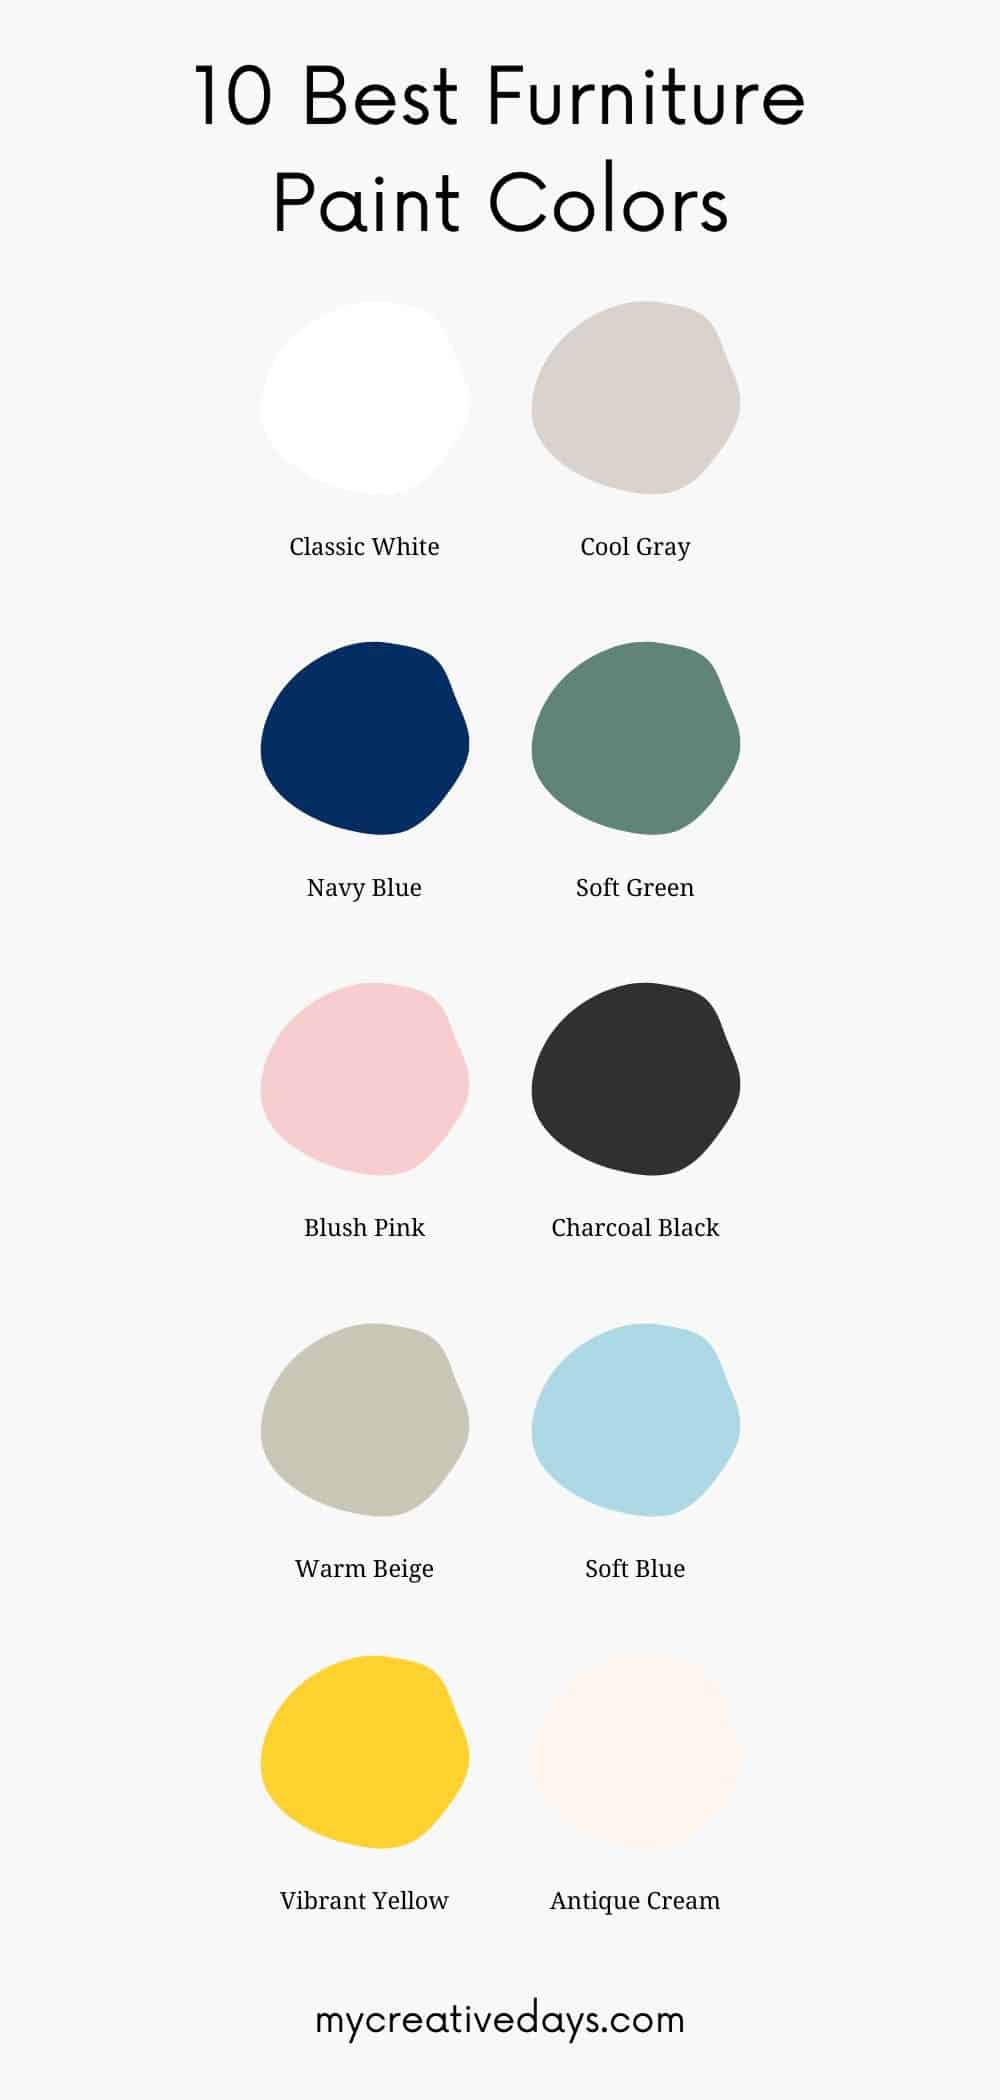 Top 10 Best Paint Colors for Furniture - My Creative Days